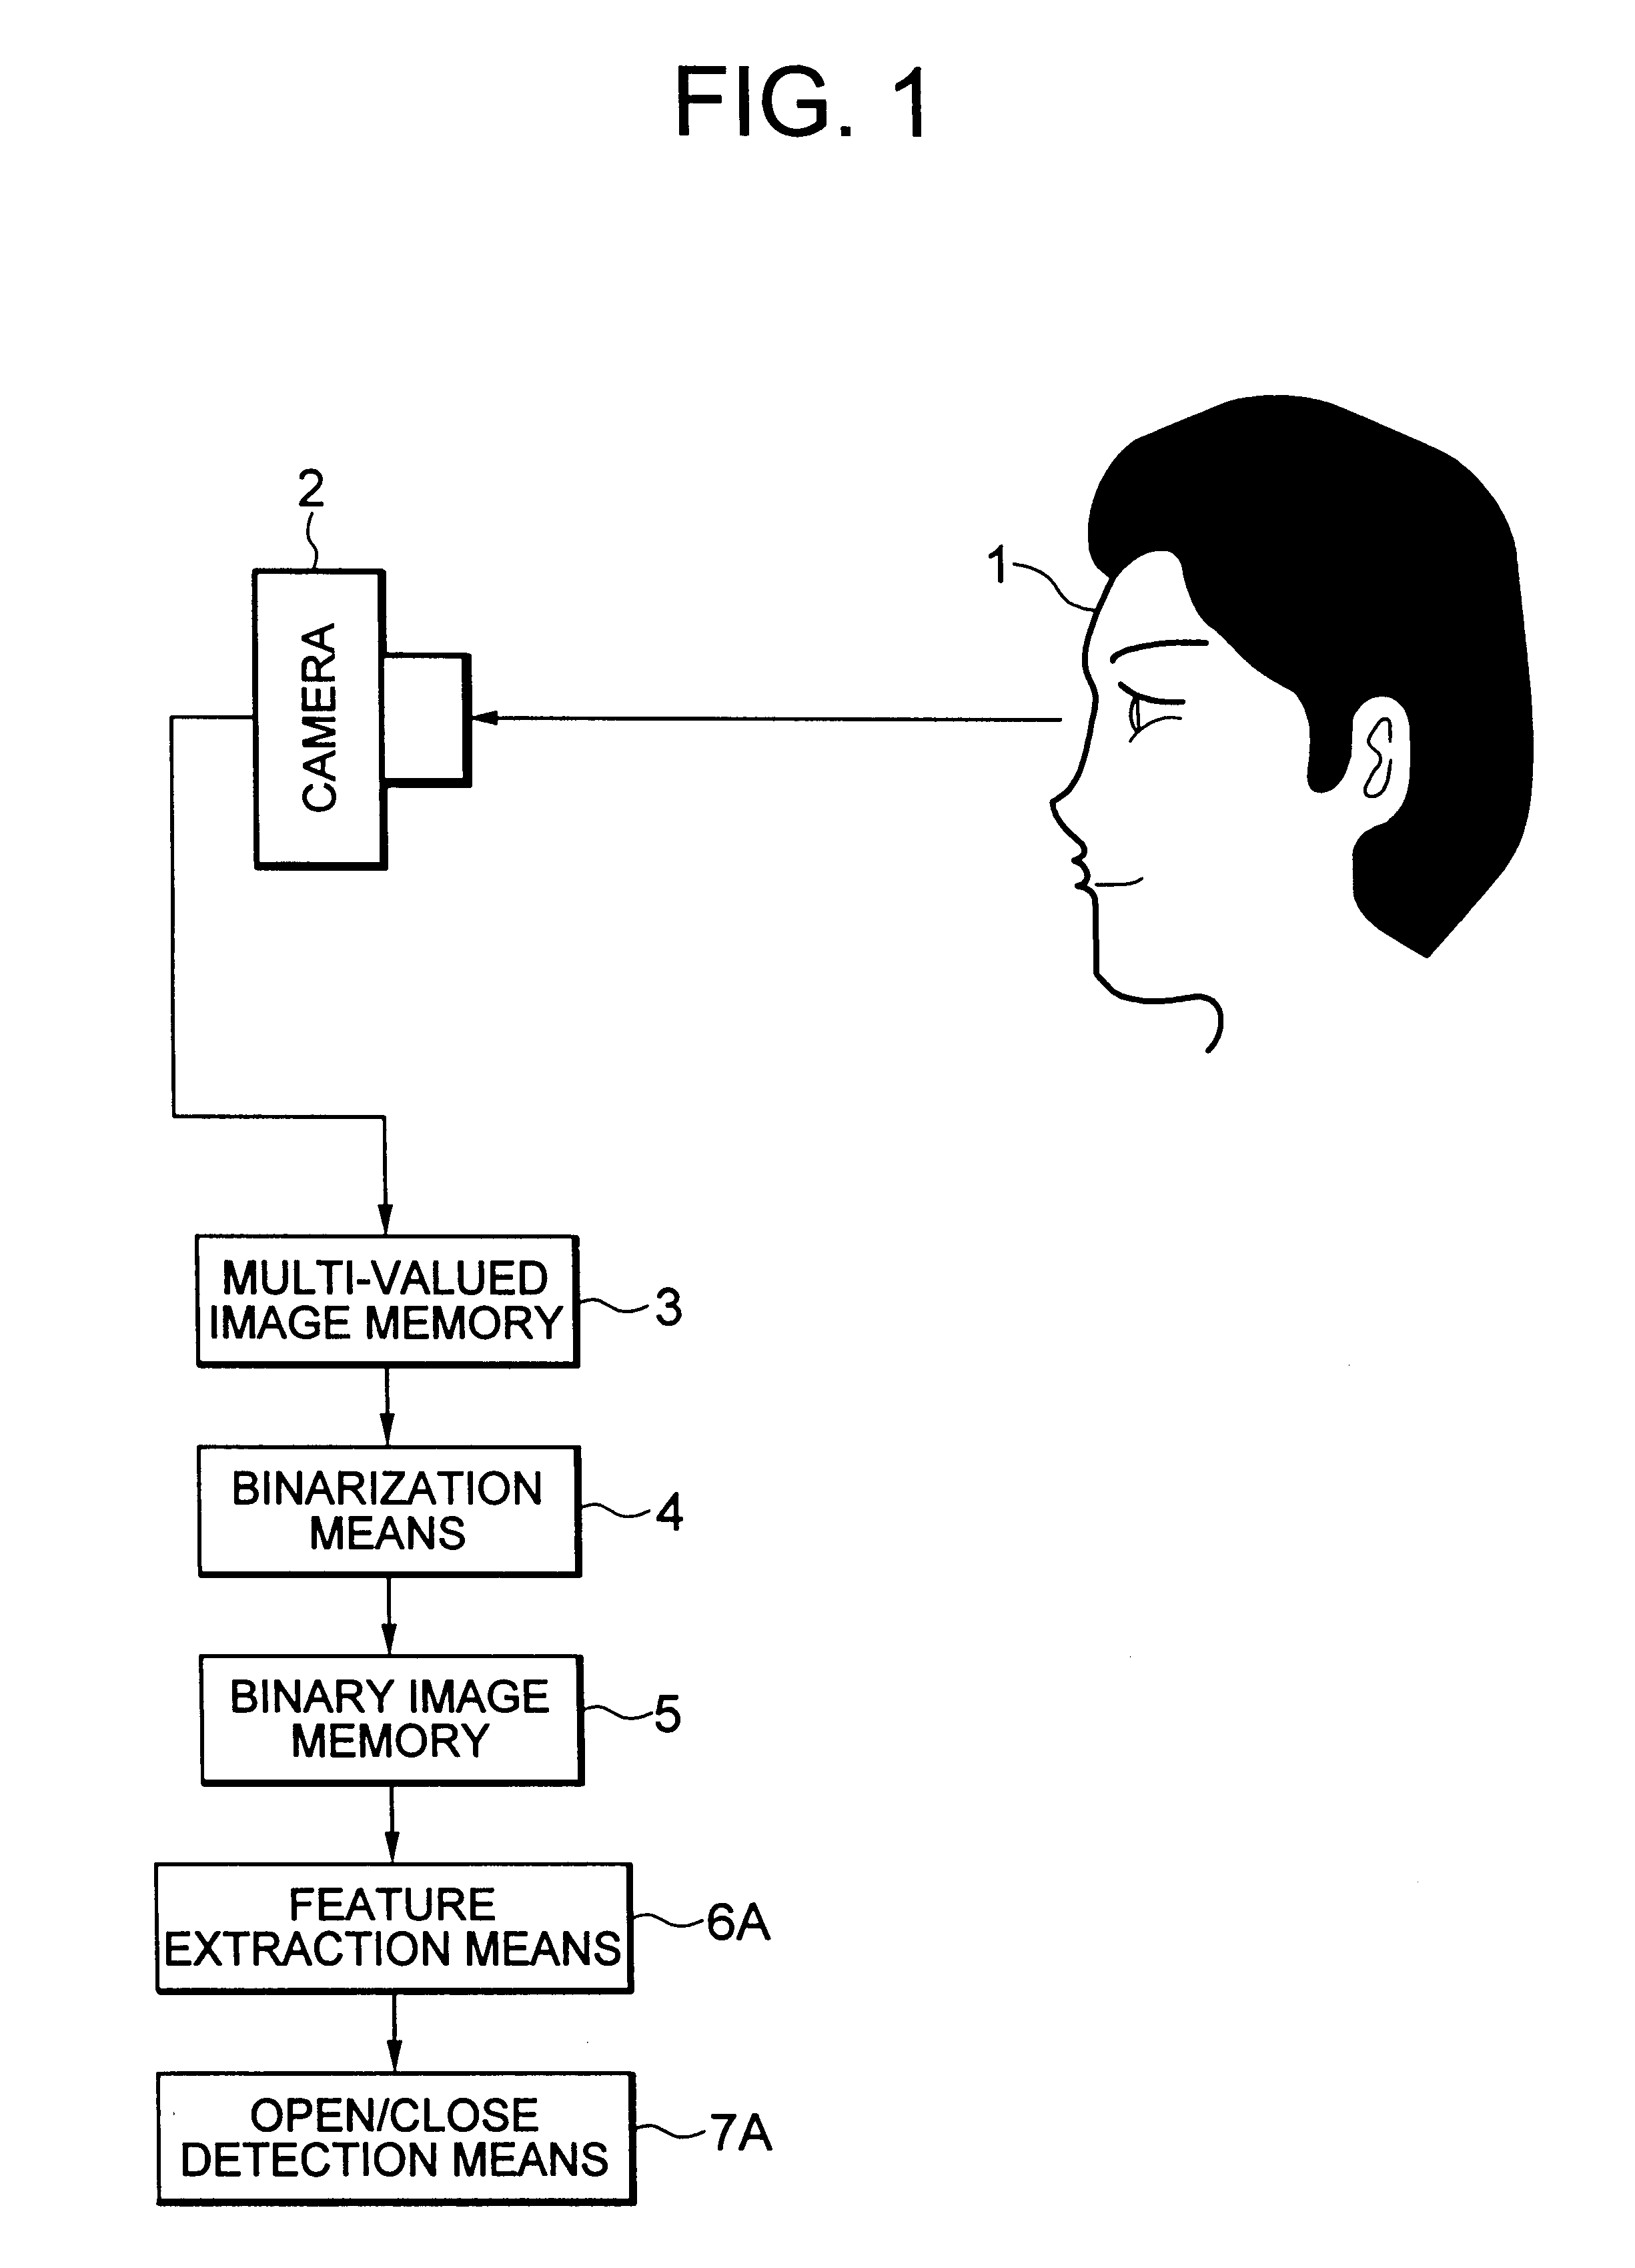 Face image processing apparatus for extraction of an eye image based on the position of the naris